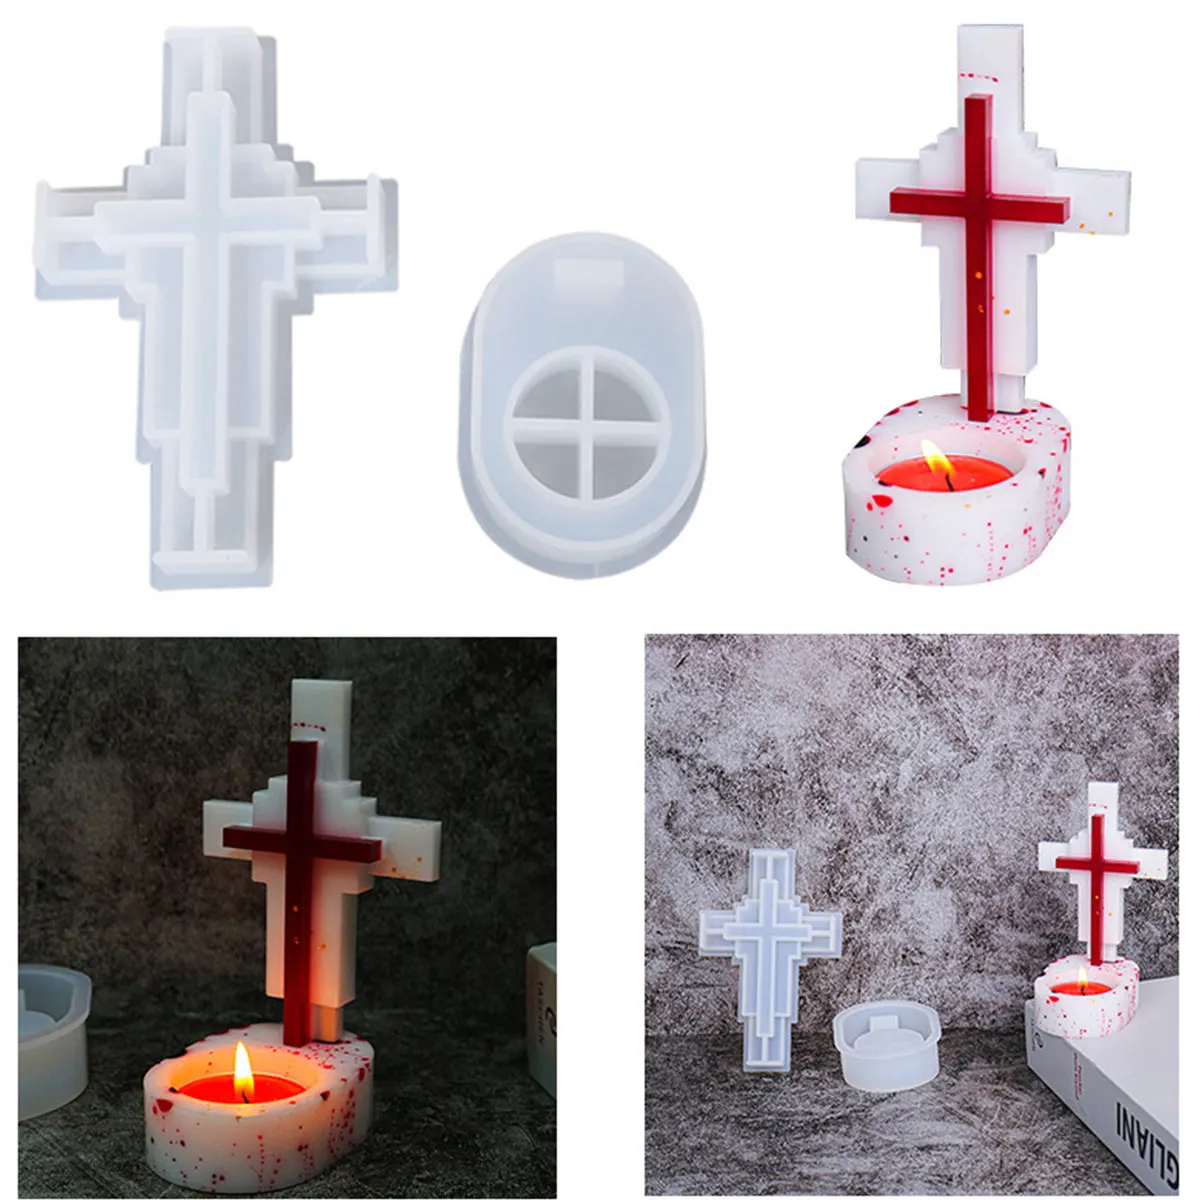 

Candle Mold 3D Cross Silicone Mold For Epoxy Resin Mold DIY Candles Making Clay Plaster Craft Casting Mould Home Decor Party